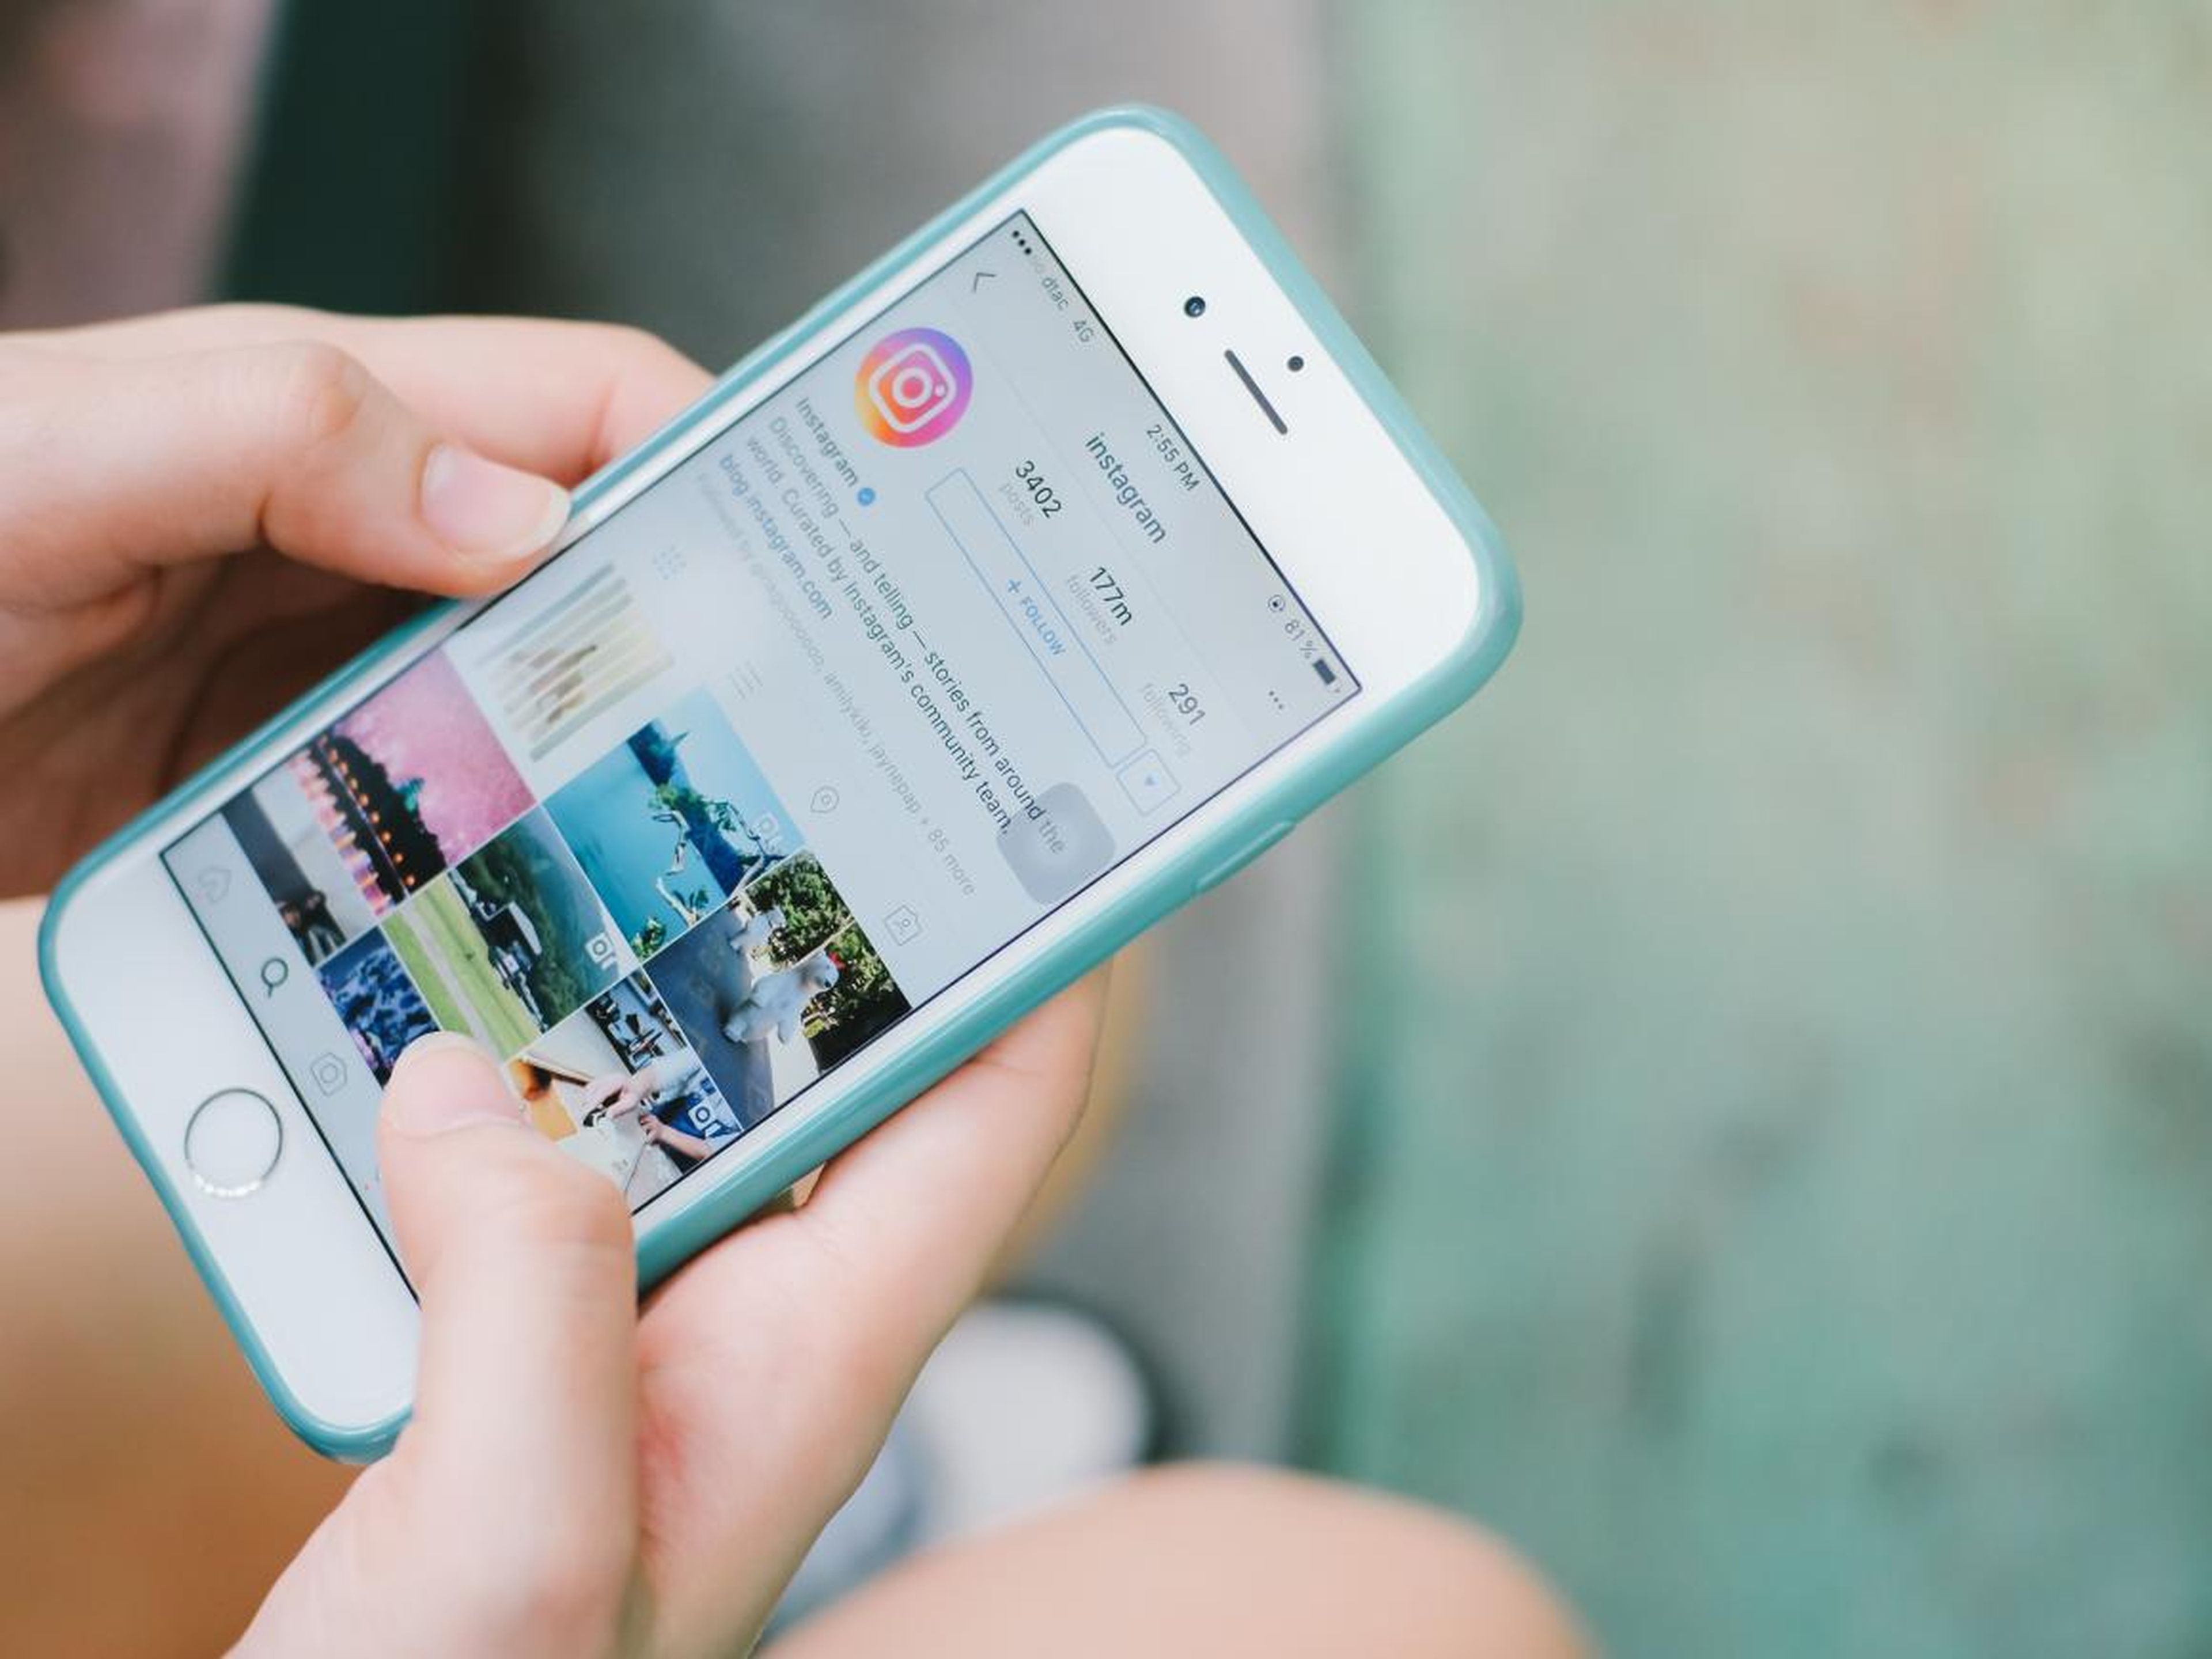 Budget airline easyJet is now helping travelers find airfare with the help of Instagram.